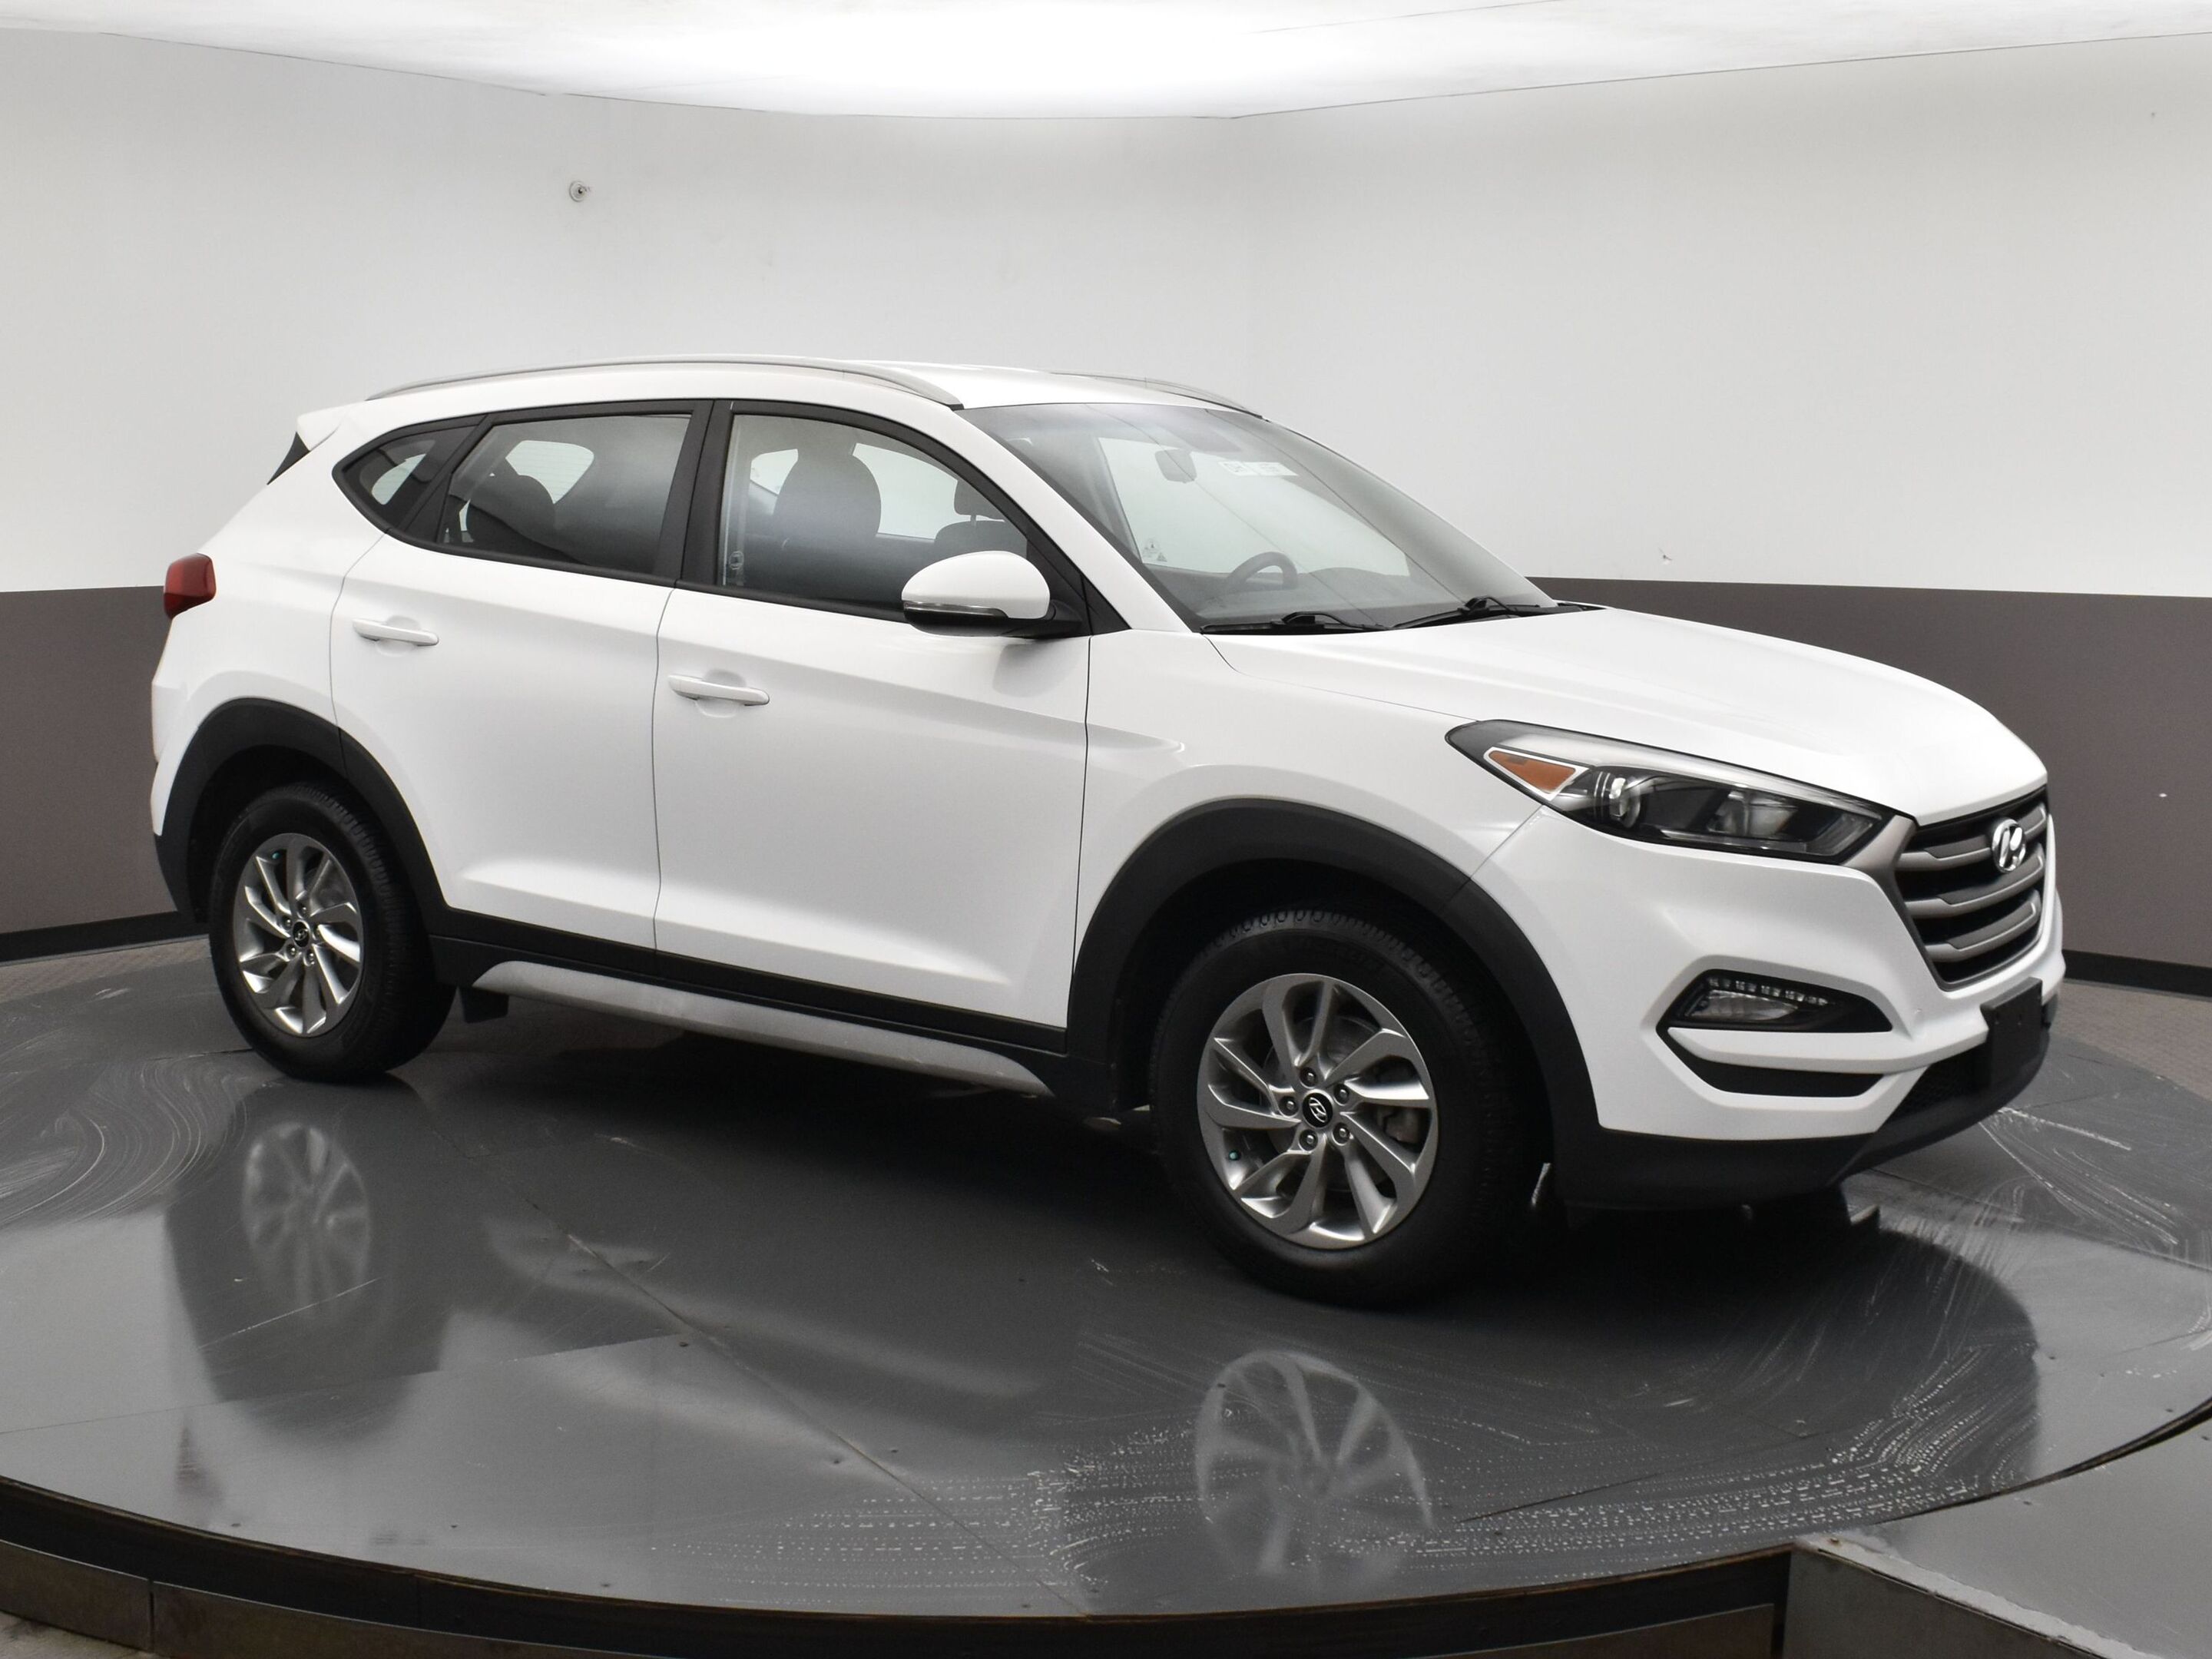 2018 Hyundai Tucson One Owner & Fully Certified GLS Premium FWD, Alloy